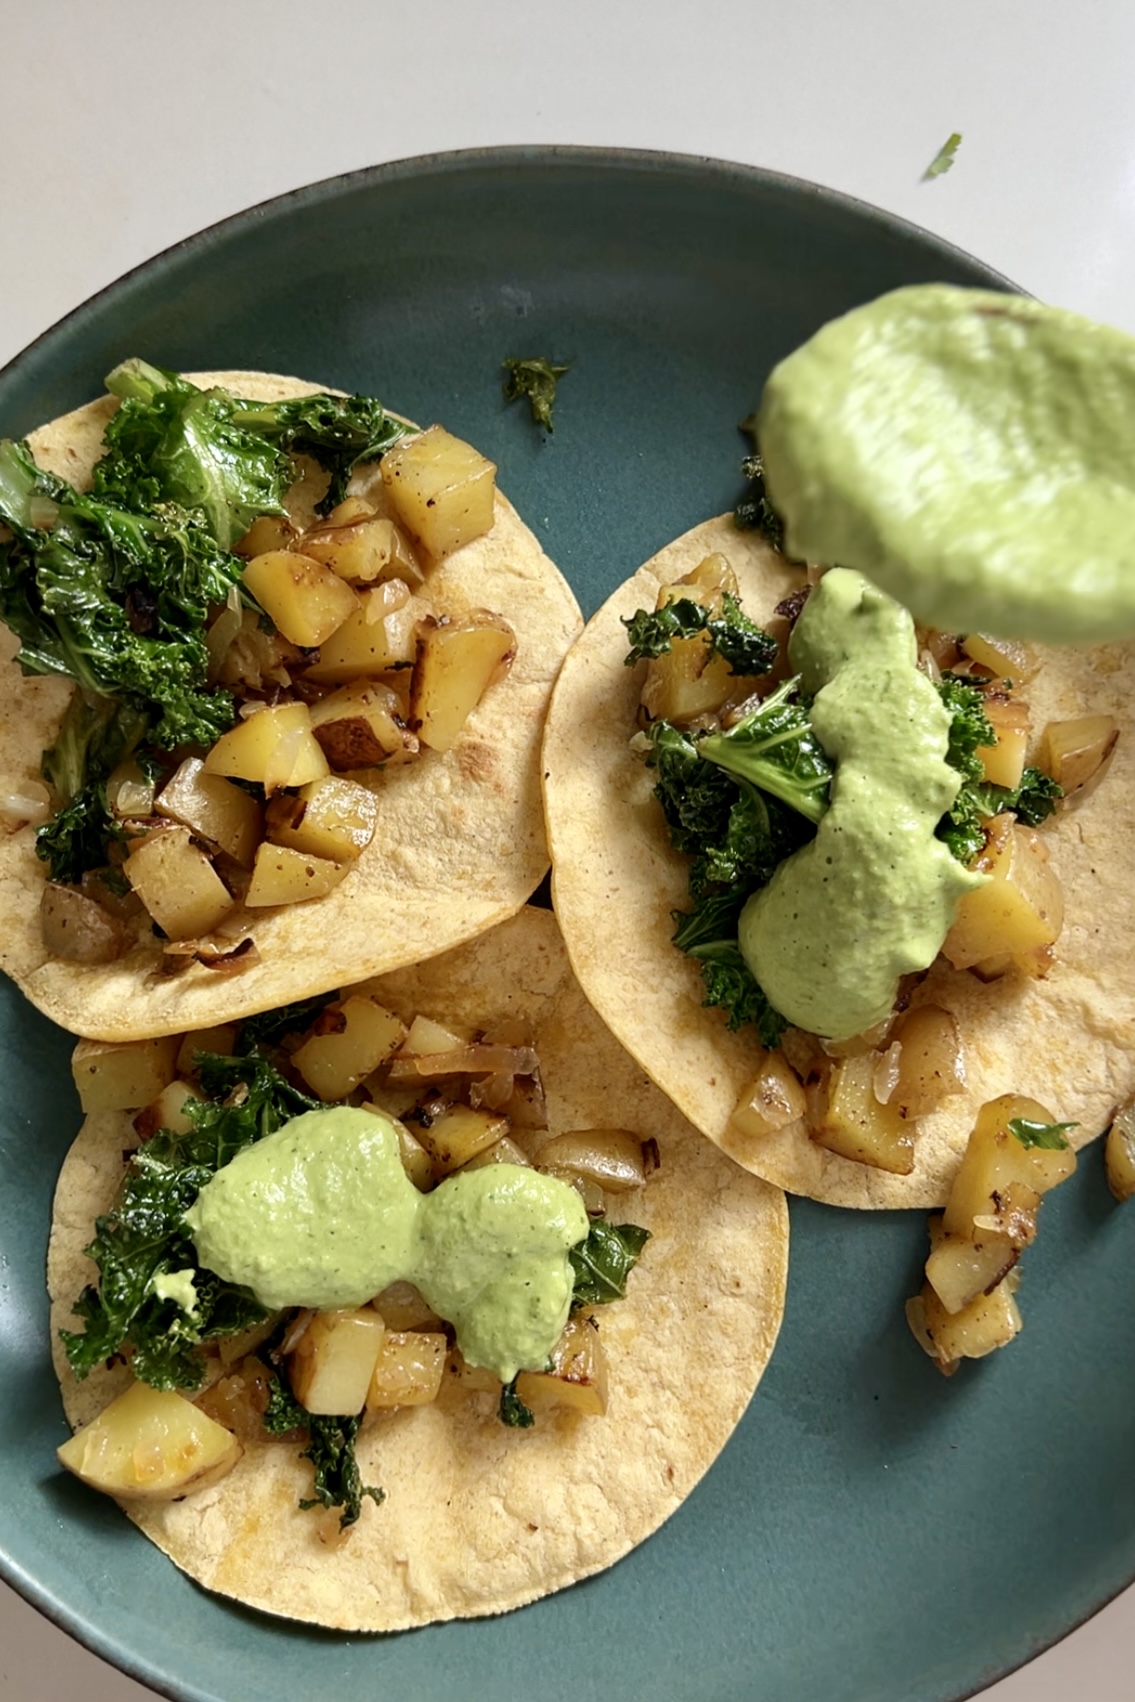 A plate with three potato tacos on a teal ceramic plate. Each taco consists of sautéed diced potatoes and wilted kale on small corn tortillas. A spoonful of creamy green Cilantro Bitchin Sauce is being drizzled over the tacos, with some sauce already visible on each. The white background enhances the food's colors.